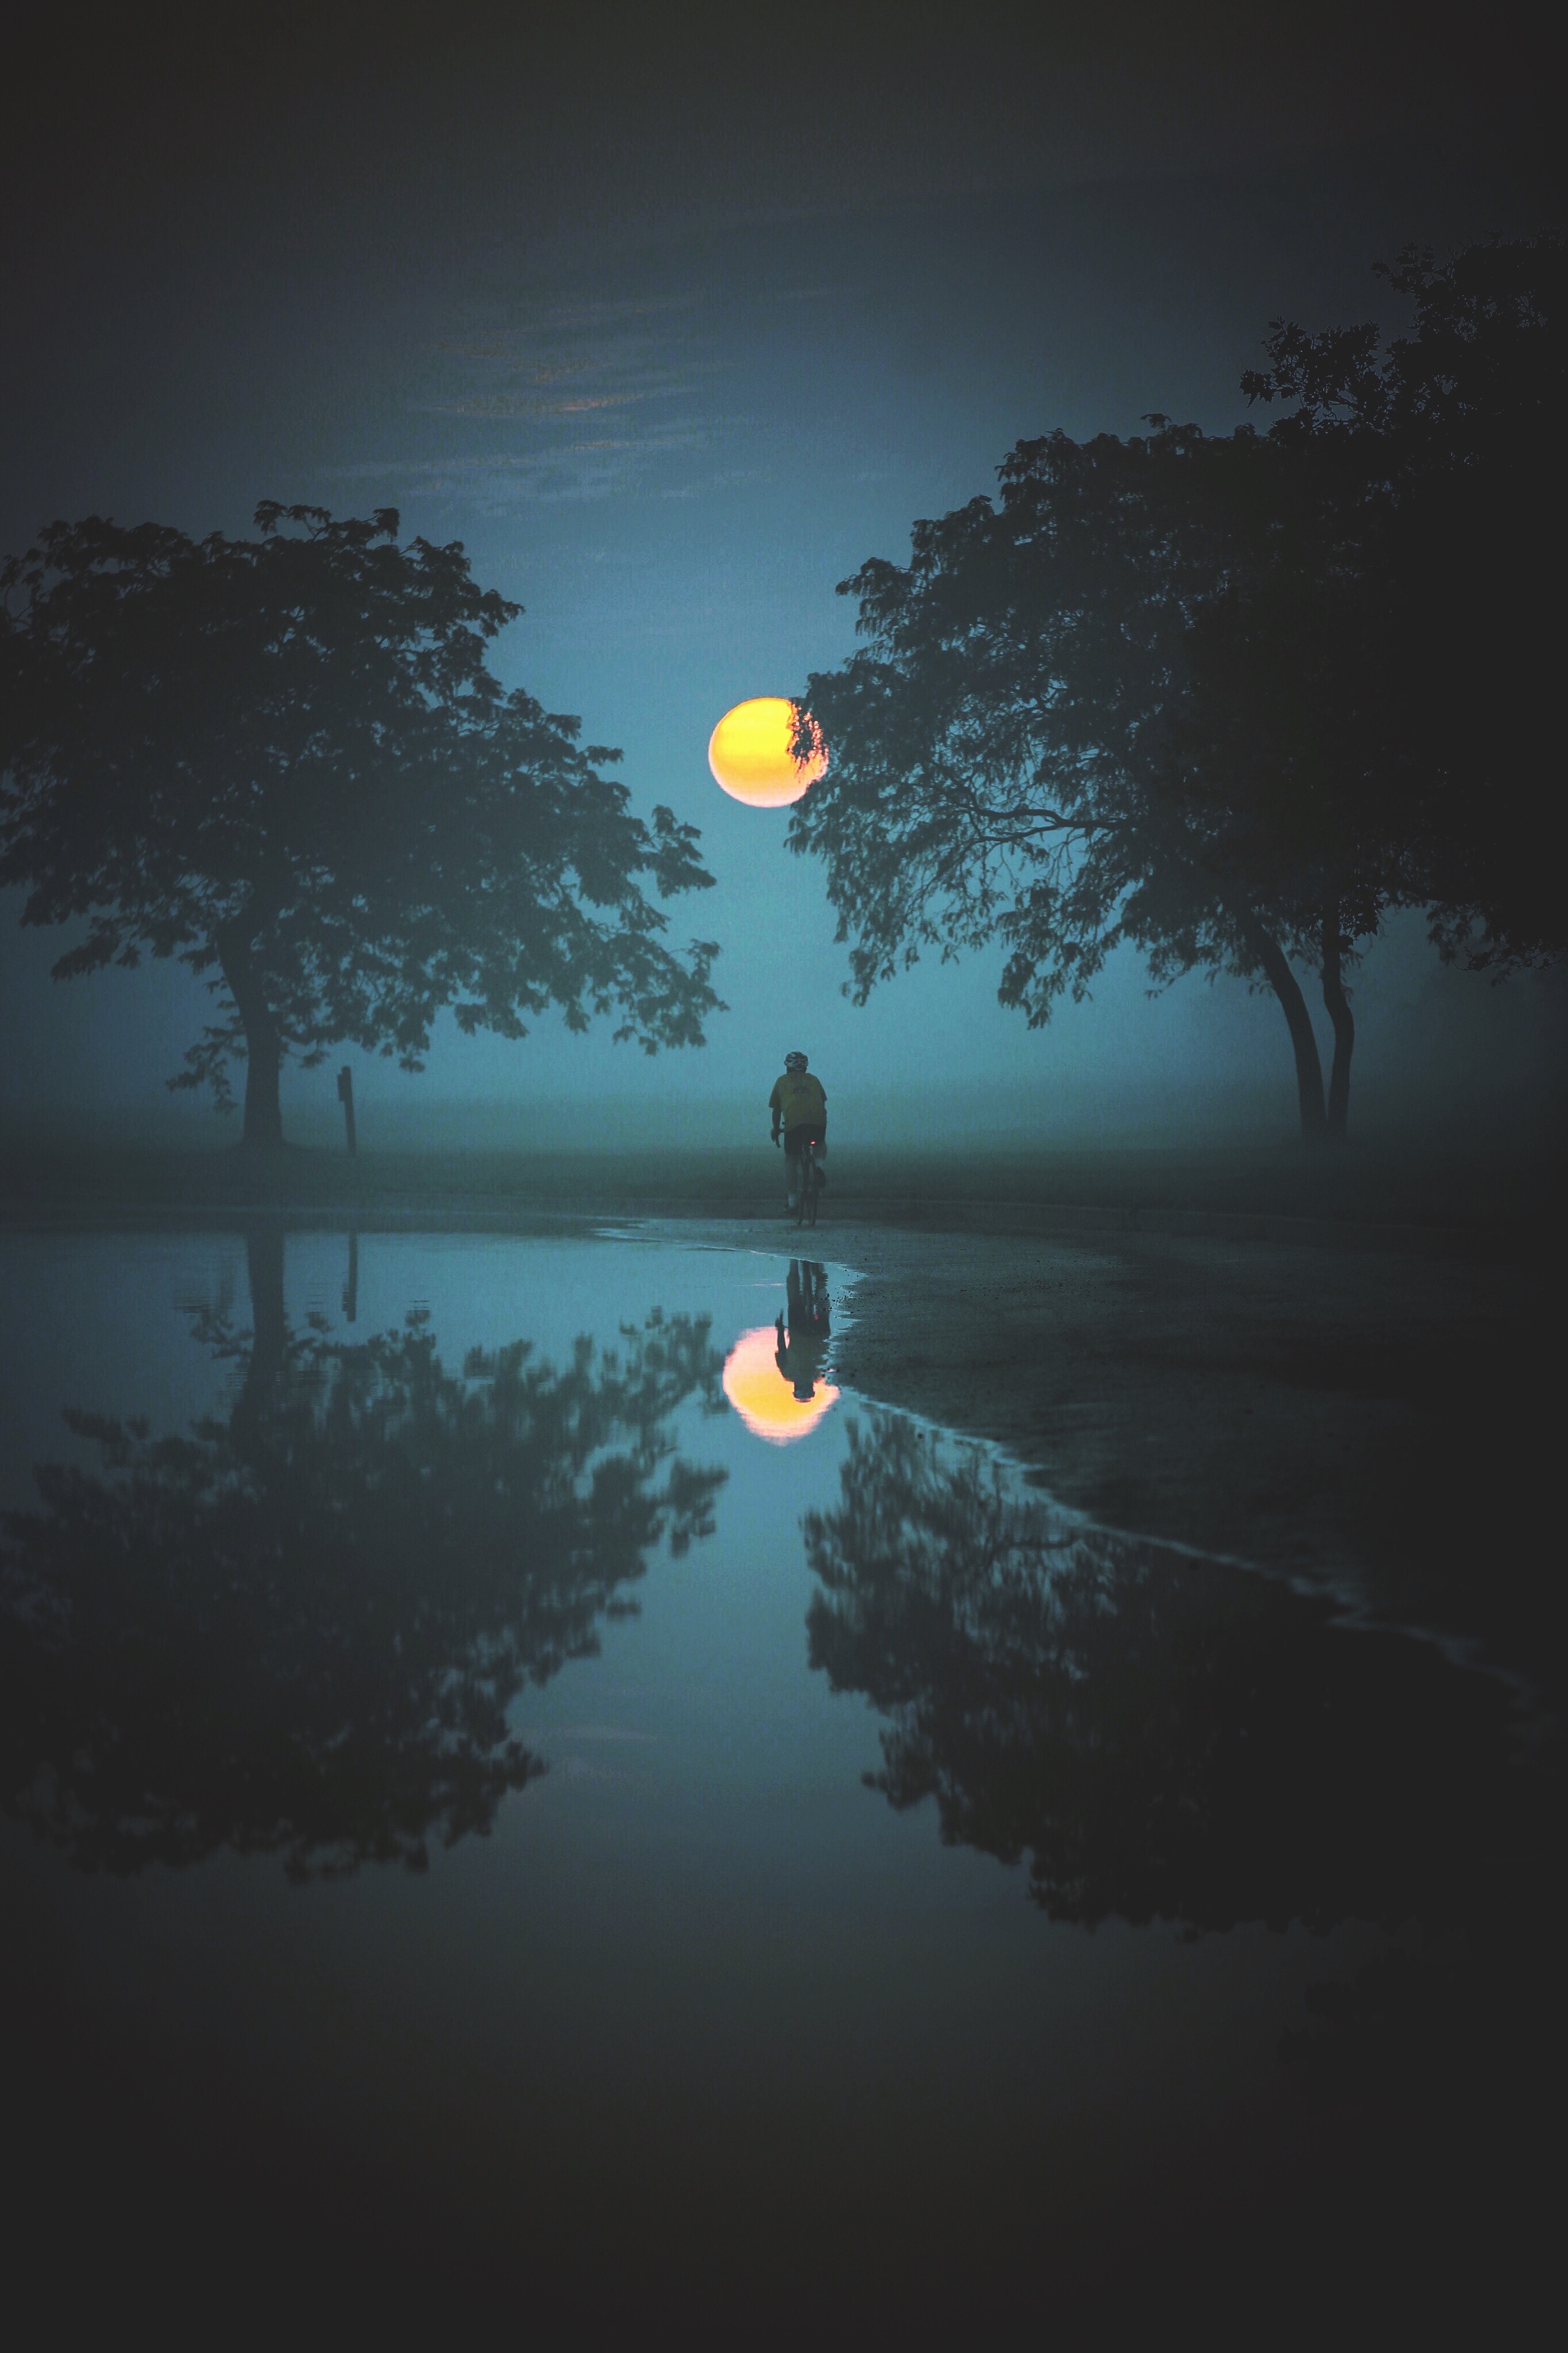 reflection, cyclist, moon, nature, water, trees, fog QHD